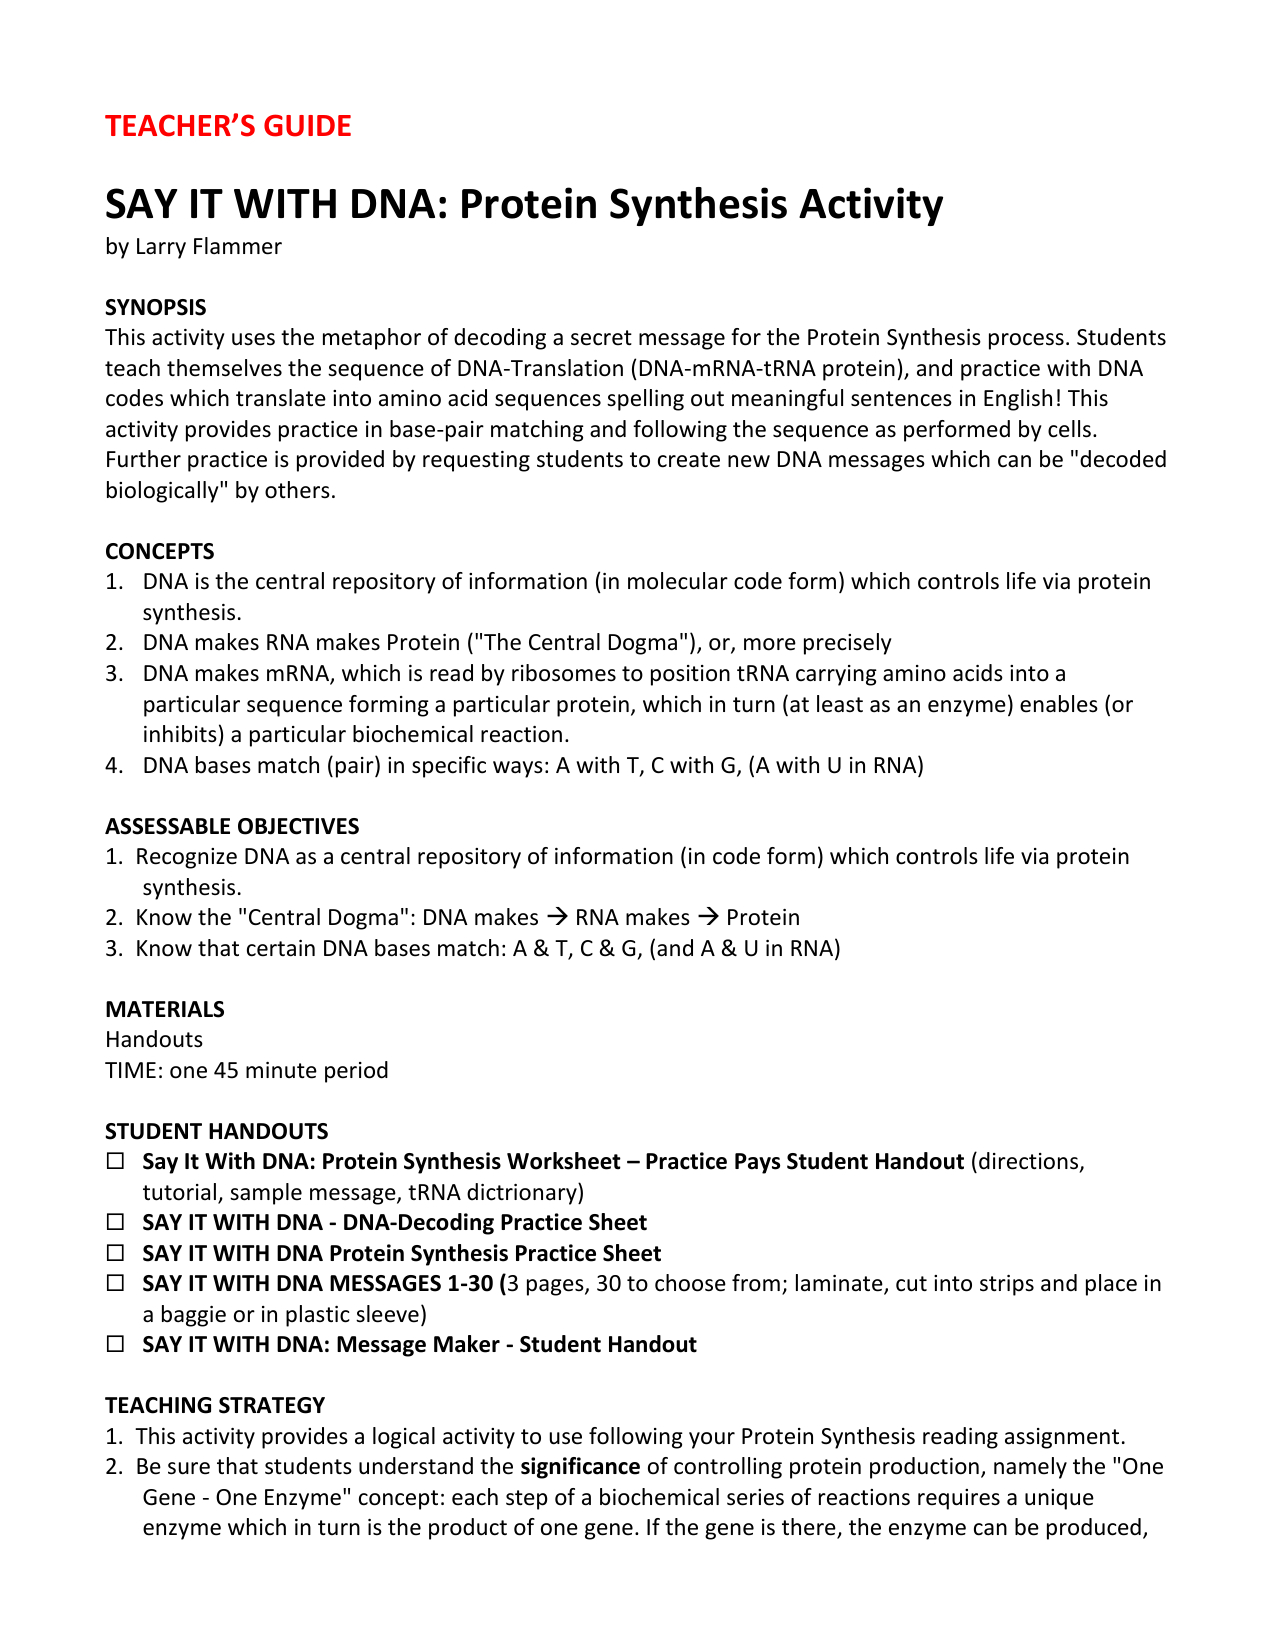 Say It With Dna Protein Synthesis Worksheet Practice